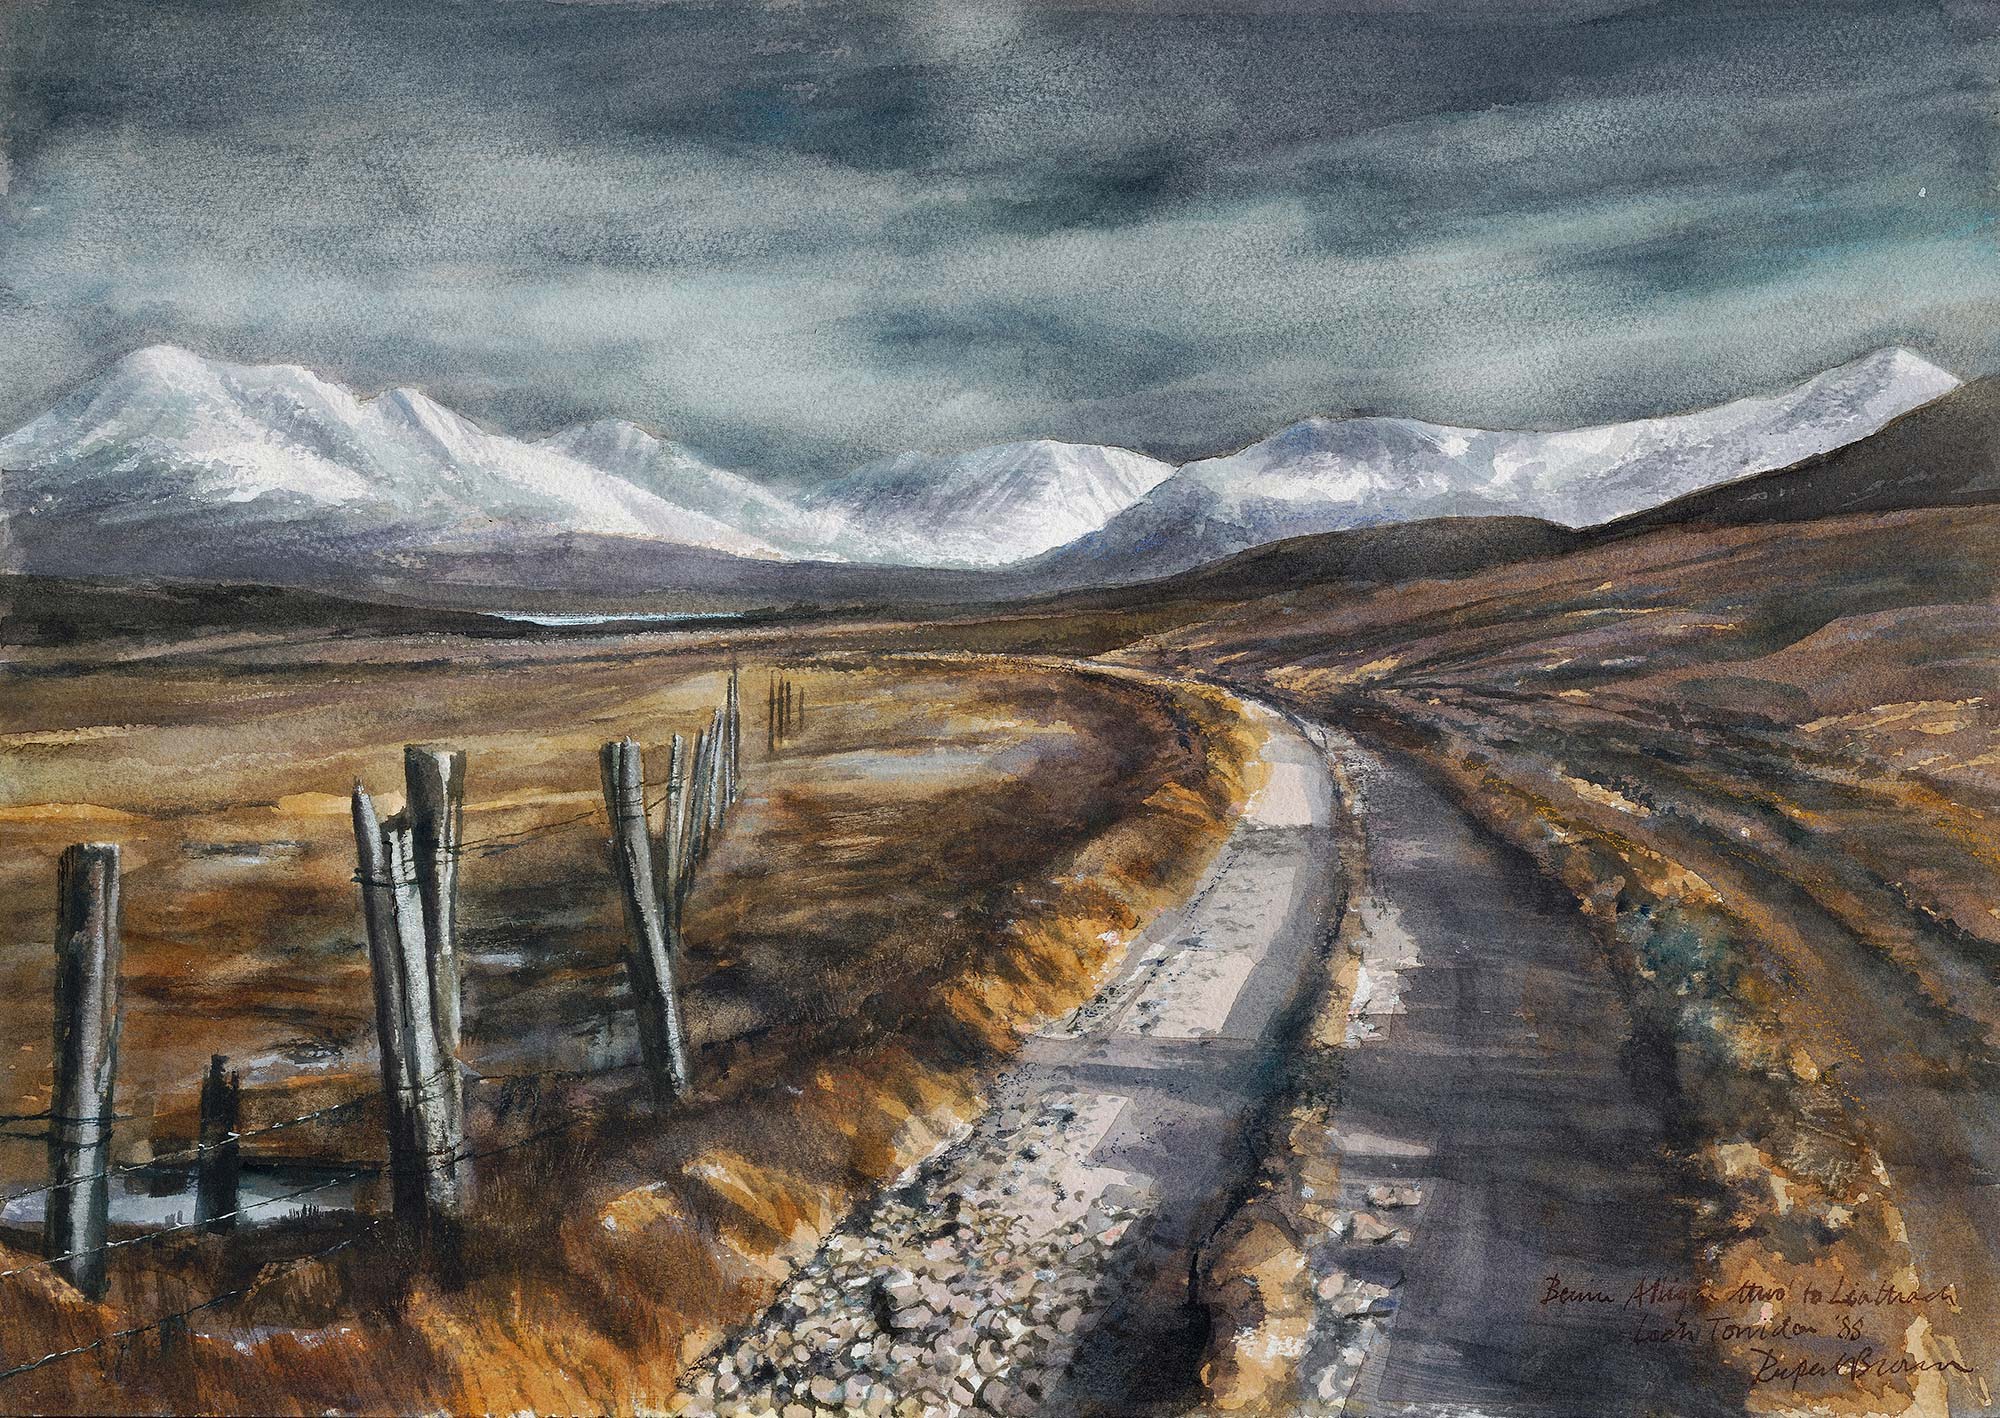 Track to Torridon by Rupert Brown